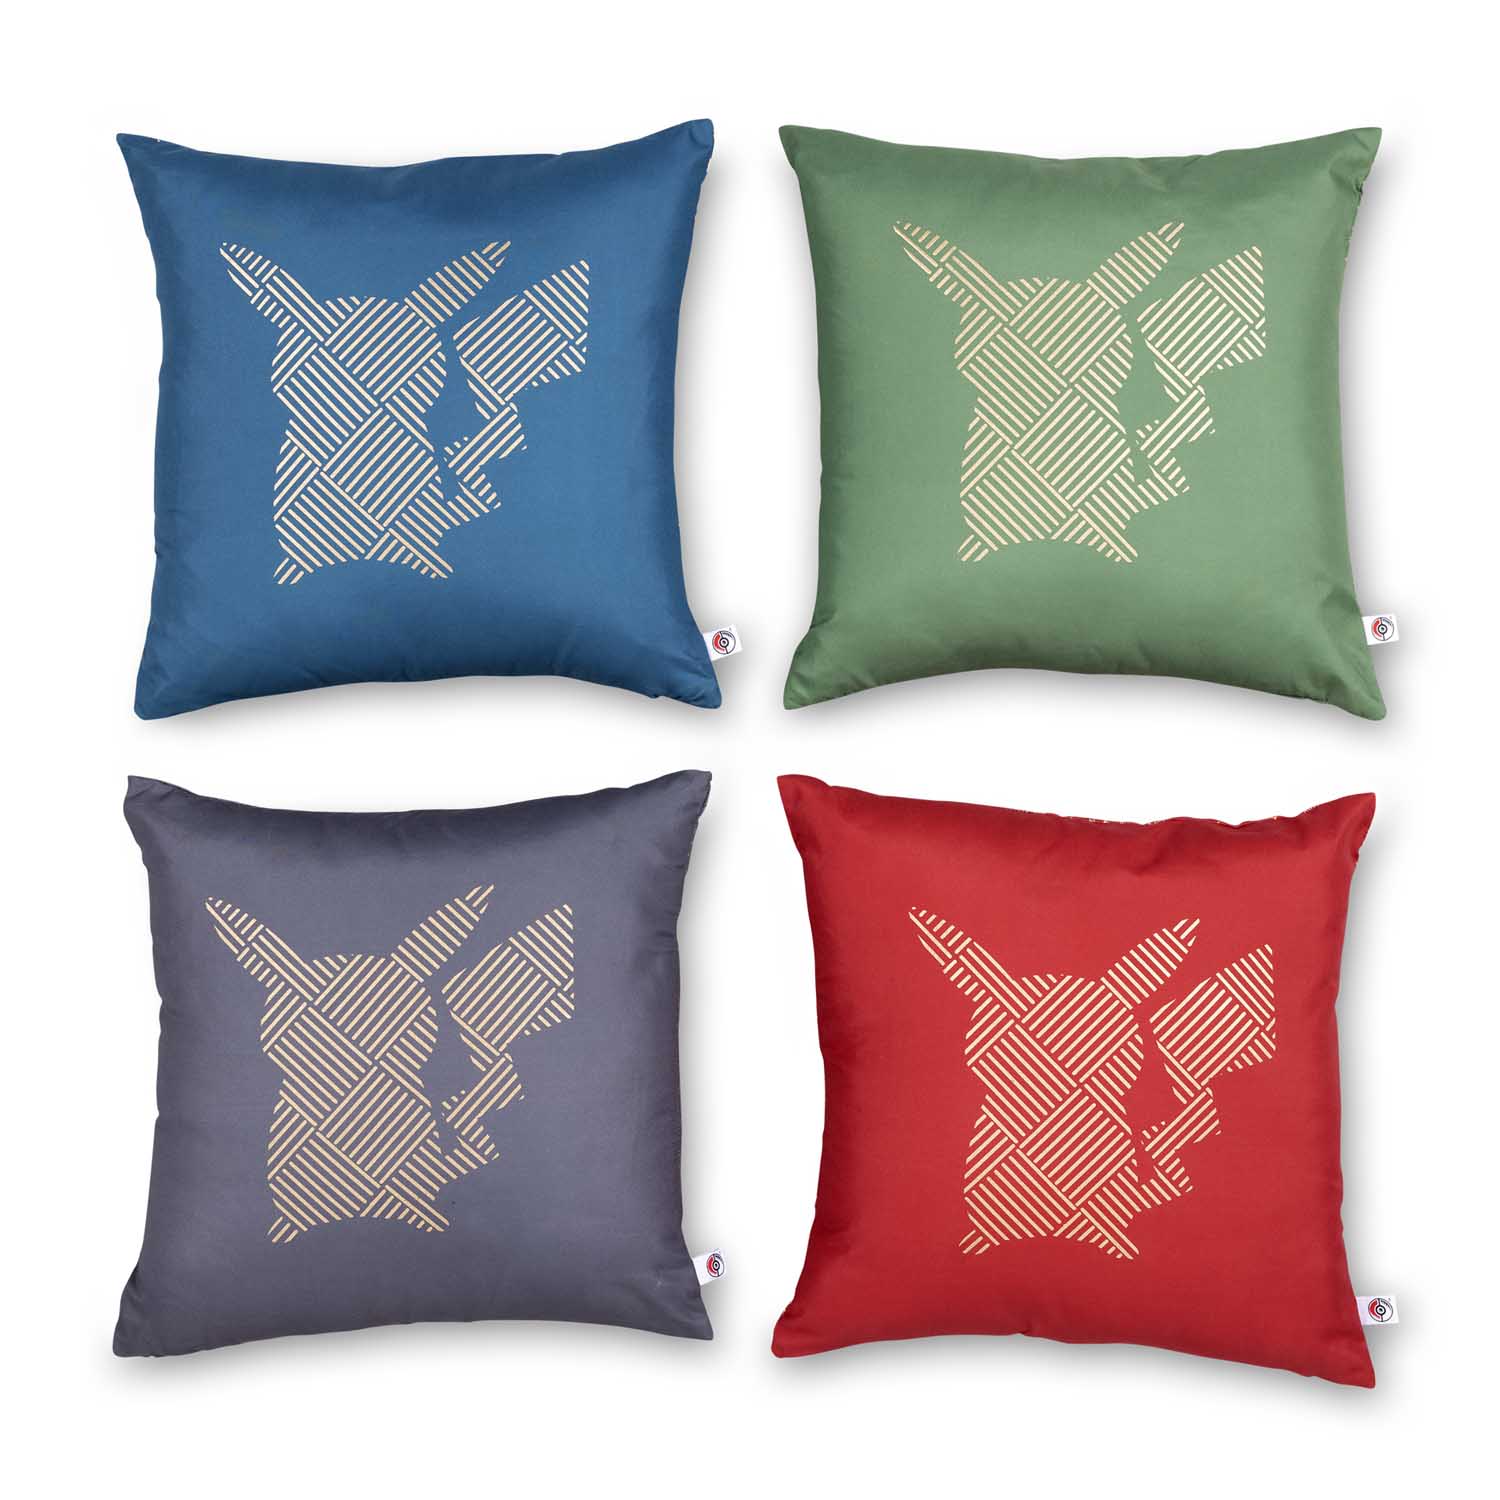 PC_Winter_Wonders_Pillow_Covers_Product_Image.jpg